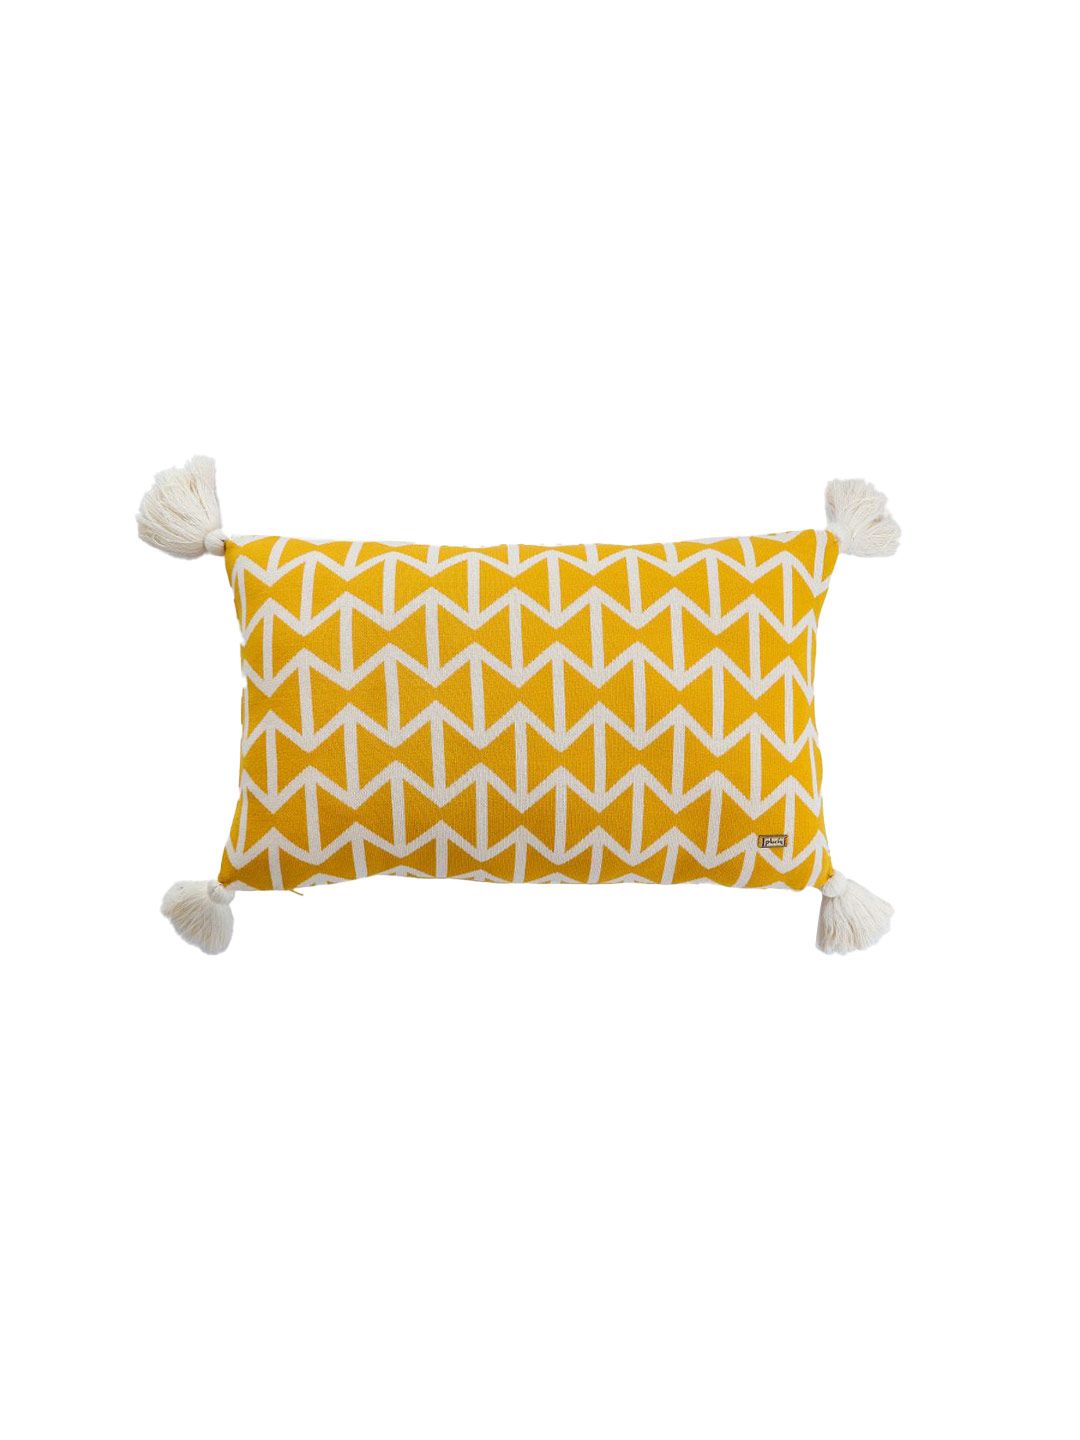 Pluchi Yellow & White Geometric Rectangle Cotton Cushion Covers Price in India